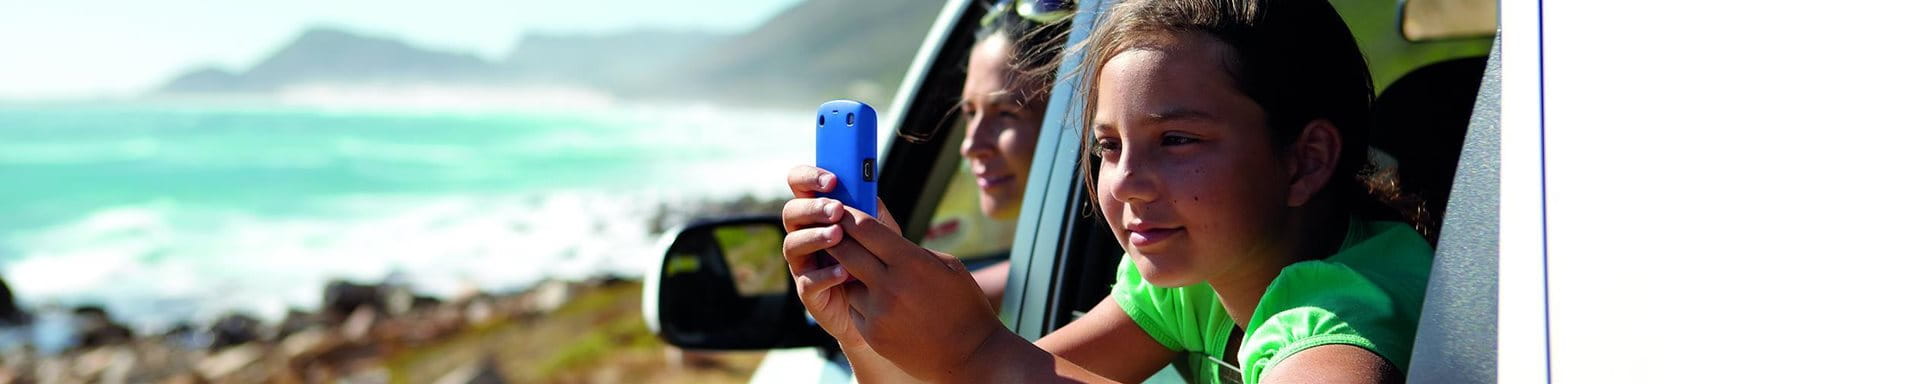 Child with cell phone in the car